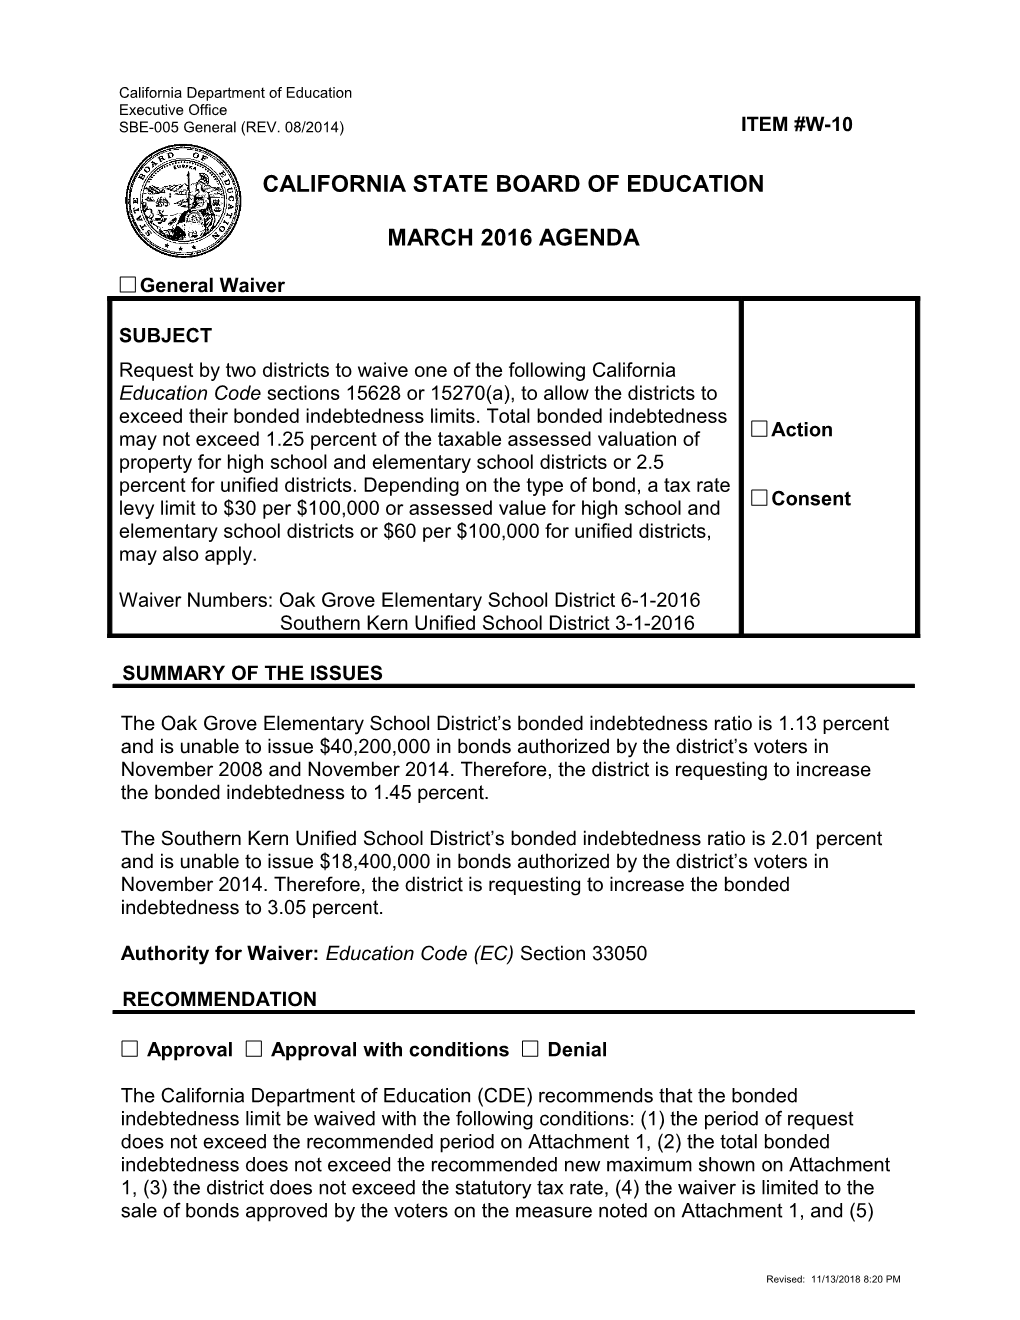 March 2016 Waiver Item W-10 - Meeting Agendas (CA State Board of Education)